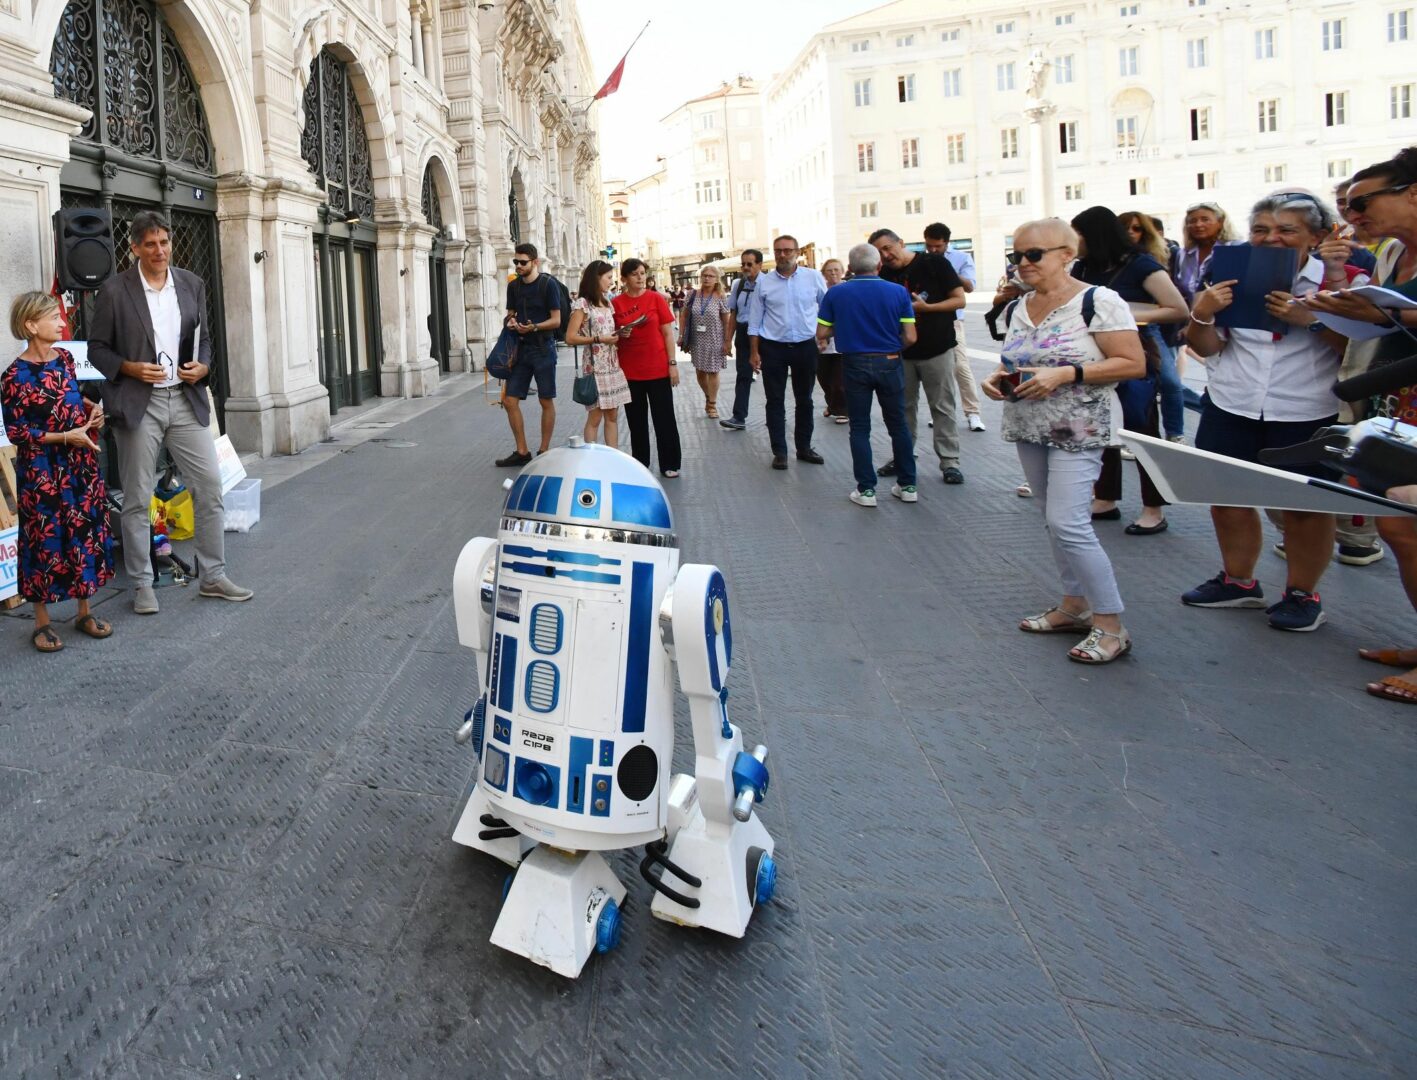 Maker faire Trieste, Fvg region supports science and research Italpress